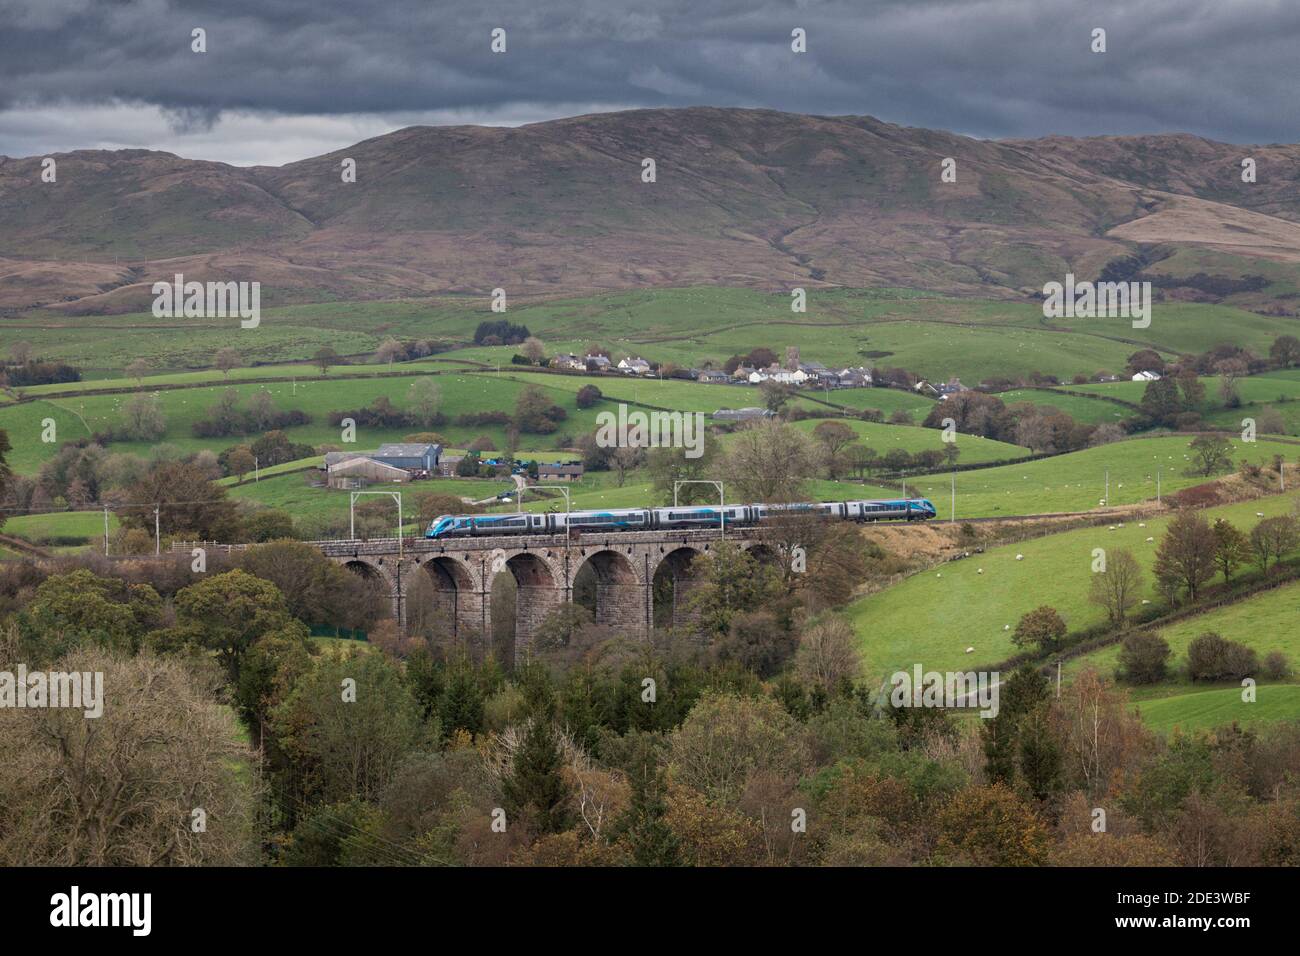 First Transpennine Express CAF class 397 Nova 2 electric train crossing Docker viaduct on the west coast mainline in Cumbria Stock Photo